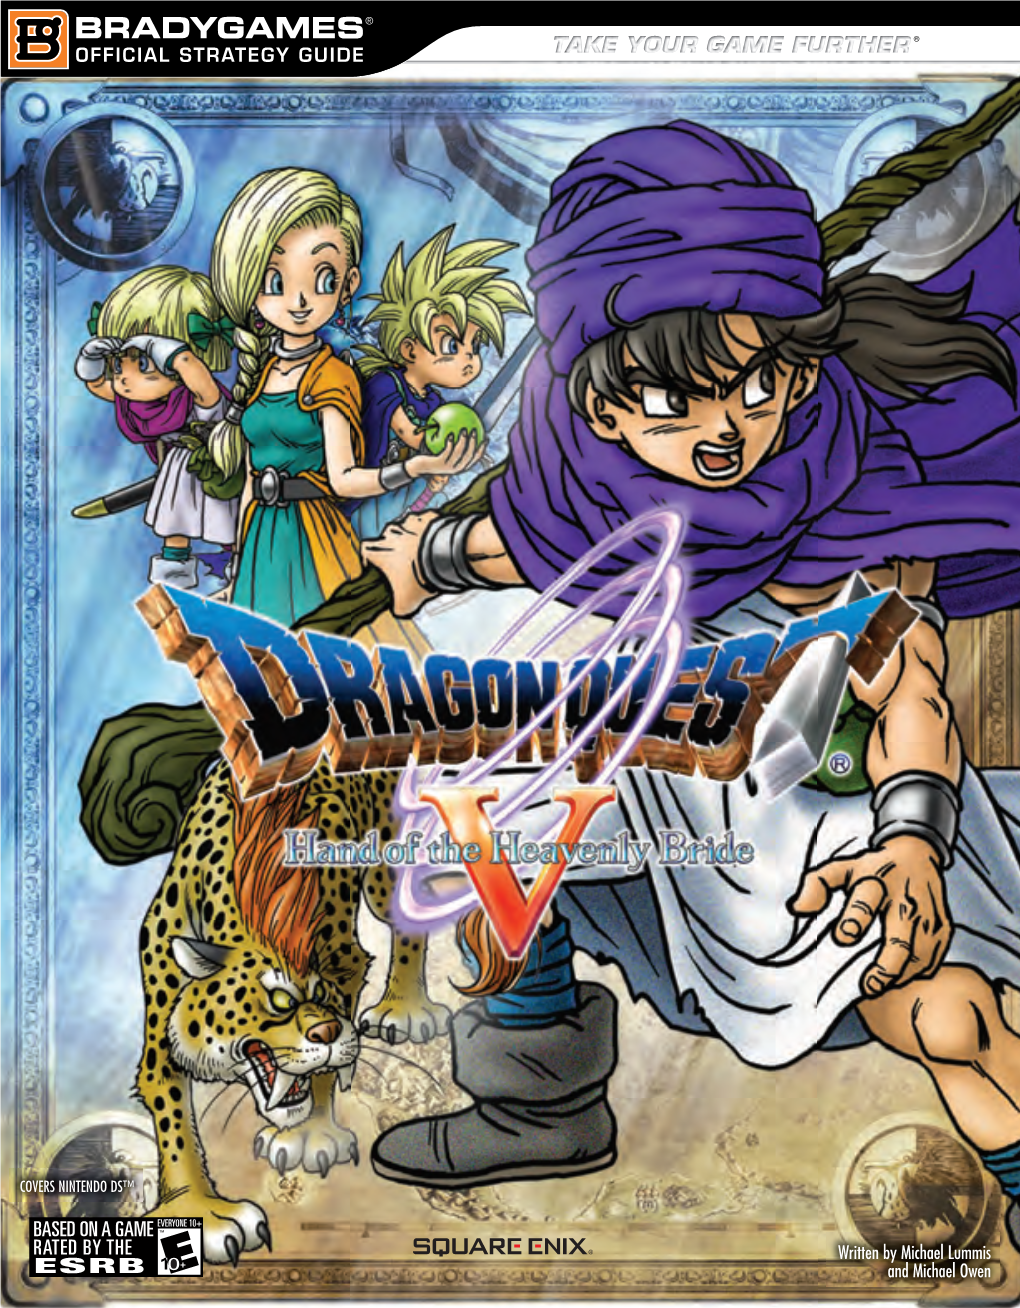 Dragon Quest V Hand of the Hea Venly Bride